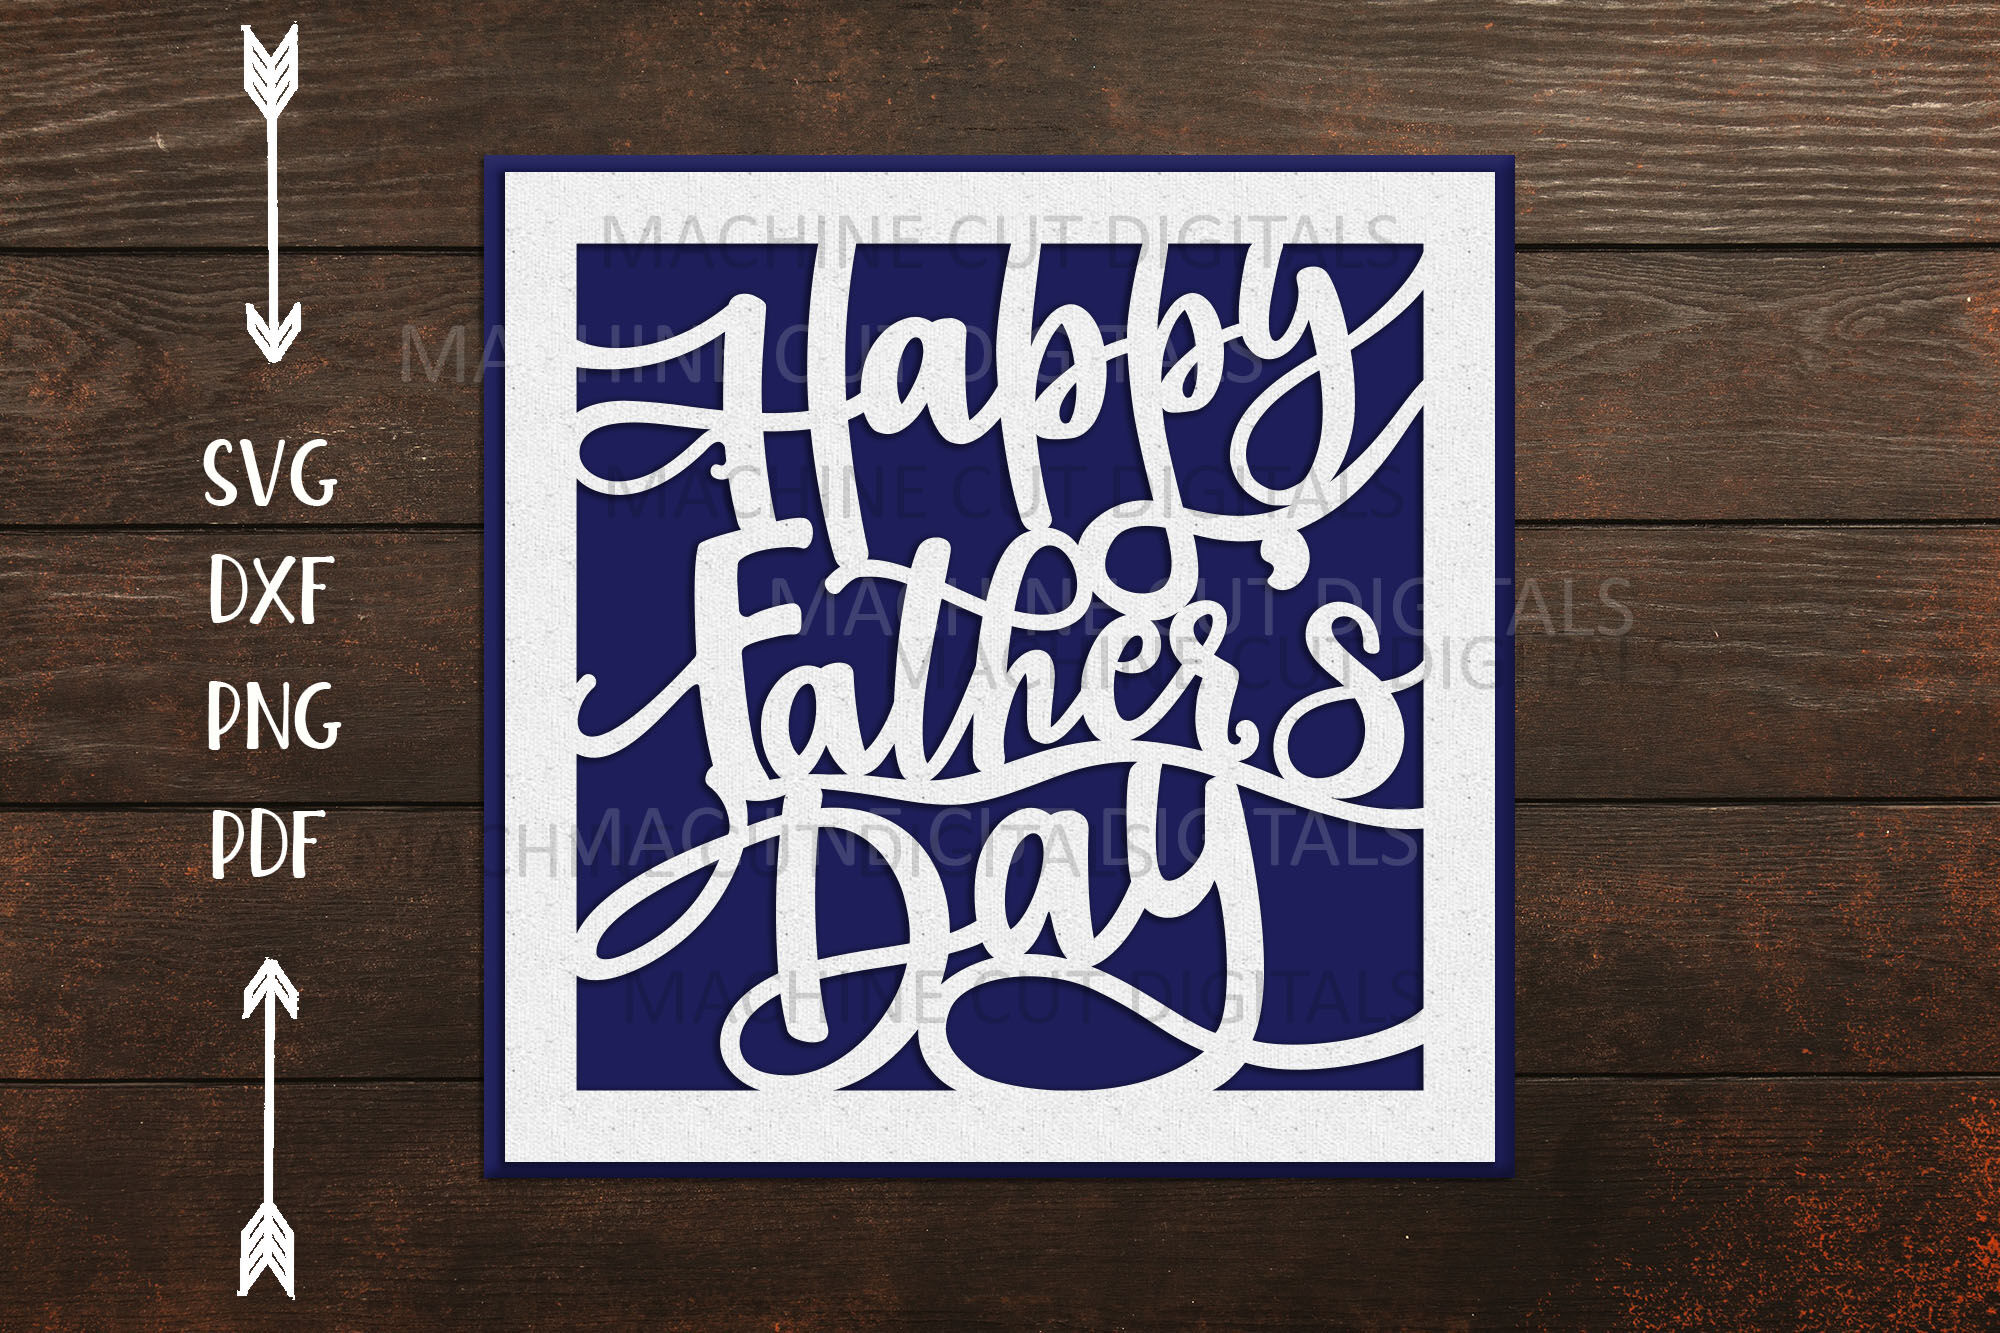 Happy Fathers Day Cut Out Card Laser Cut Cricut Svg Dxf Png By | My XXX